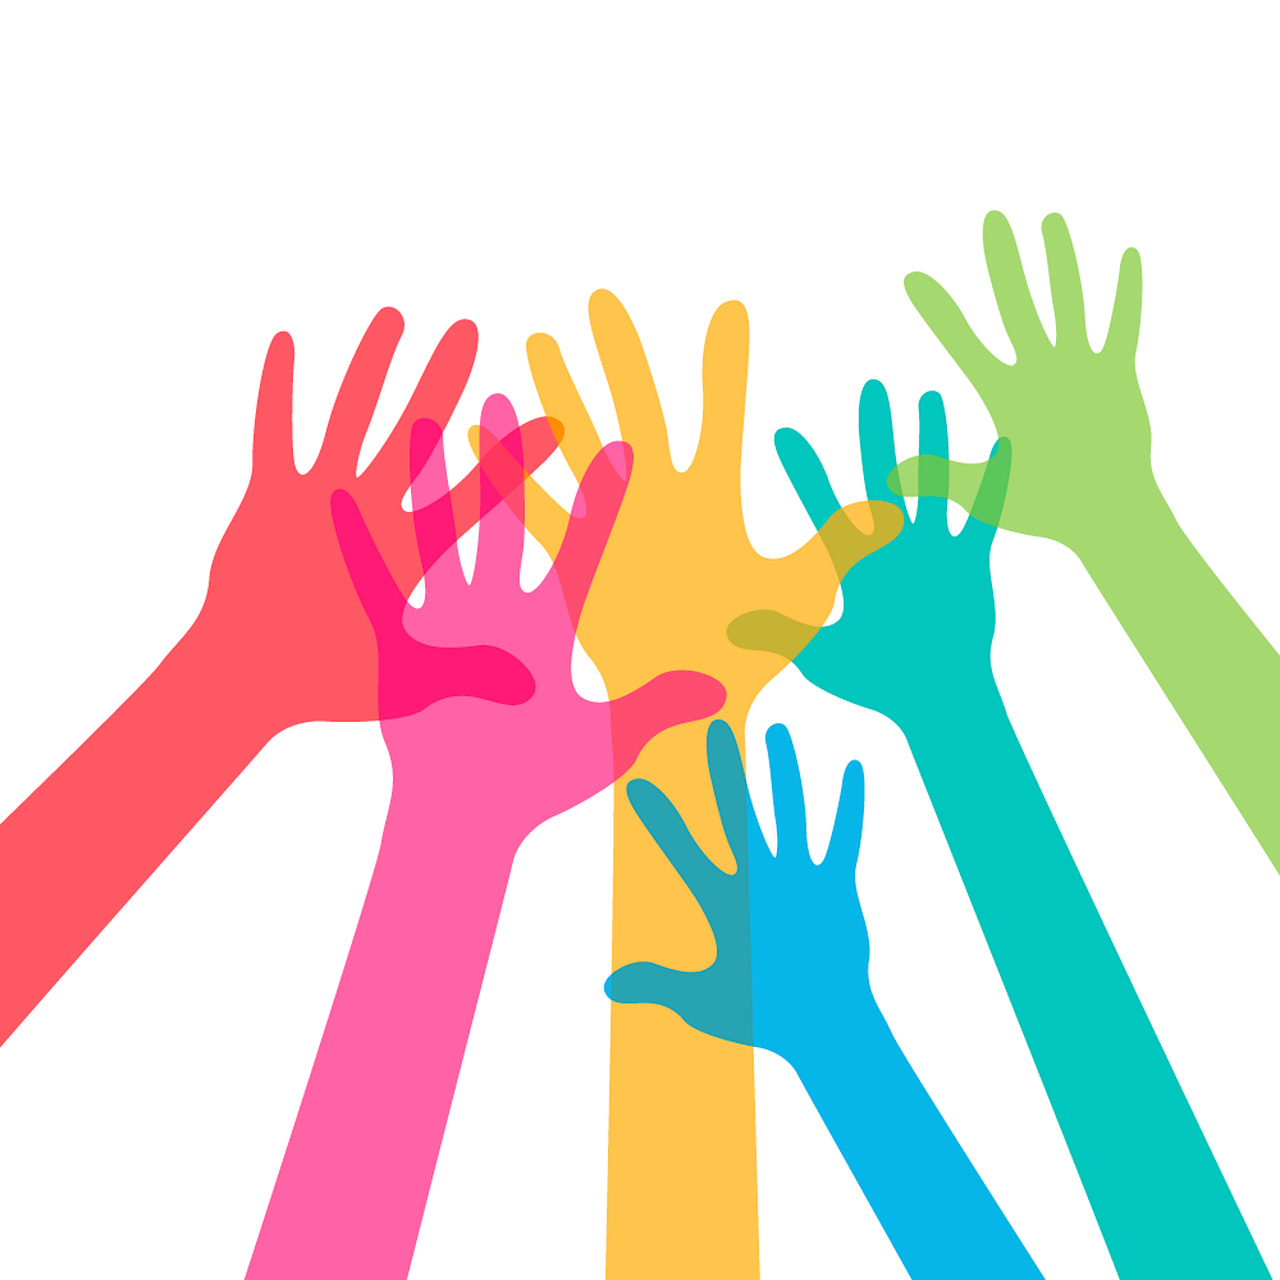 brightly colored hands and arms reaching together